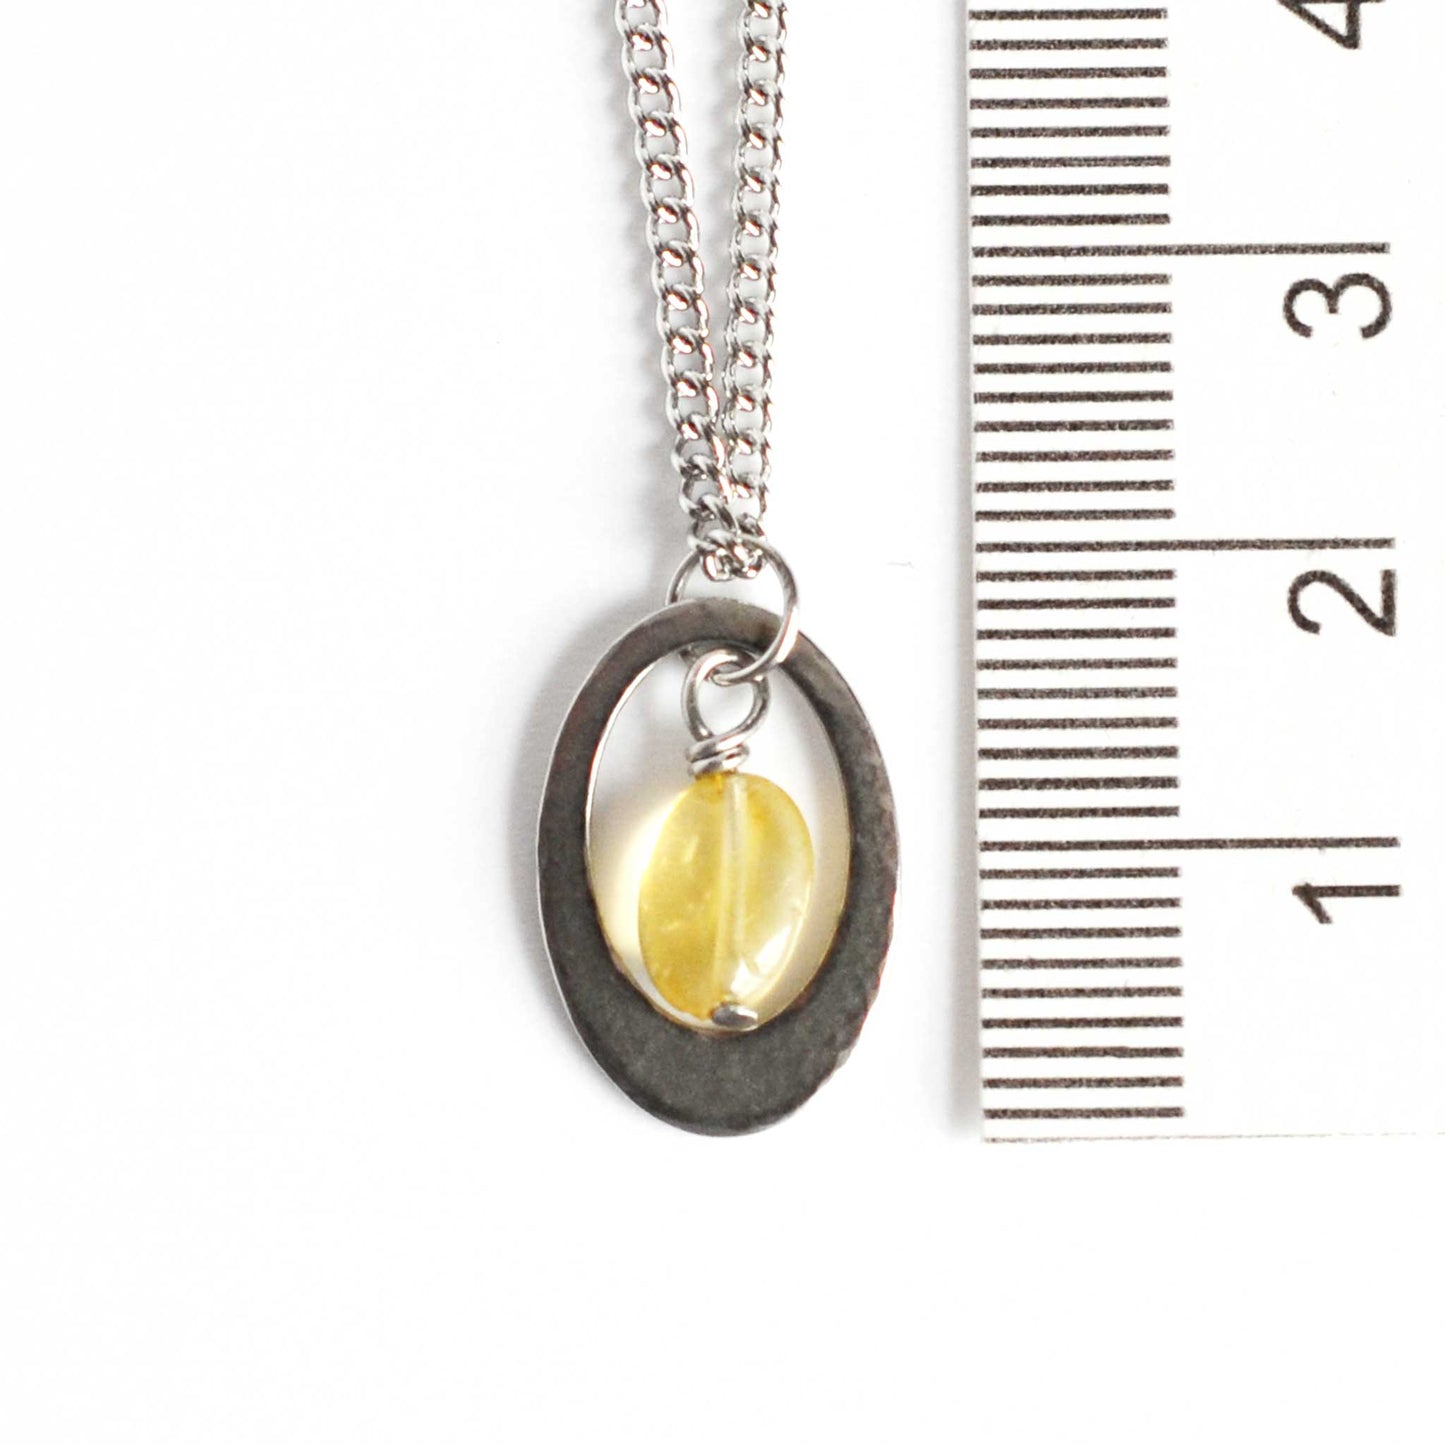 Dainty Citrine pendant necklace next to ruler.